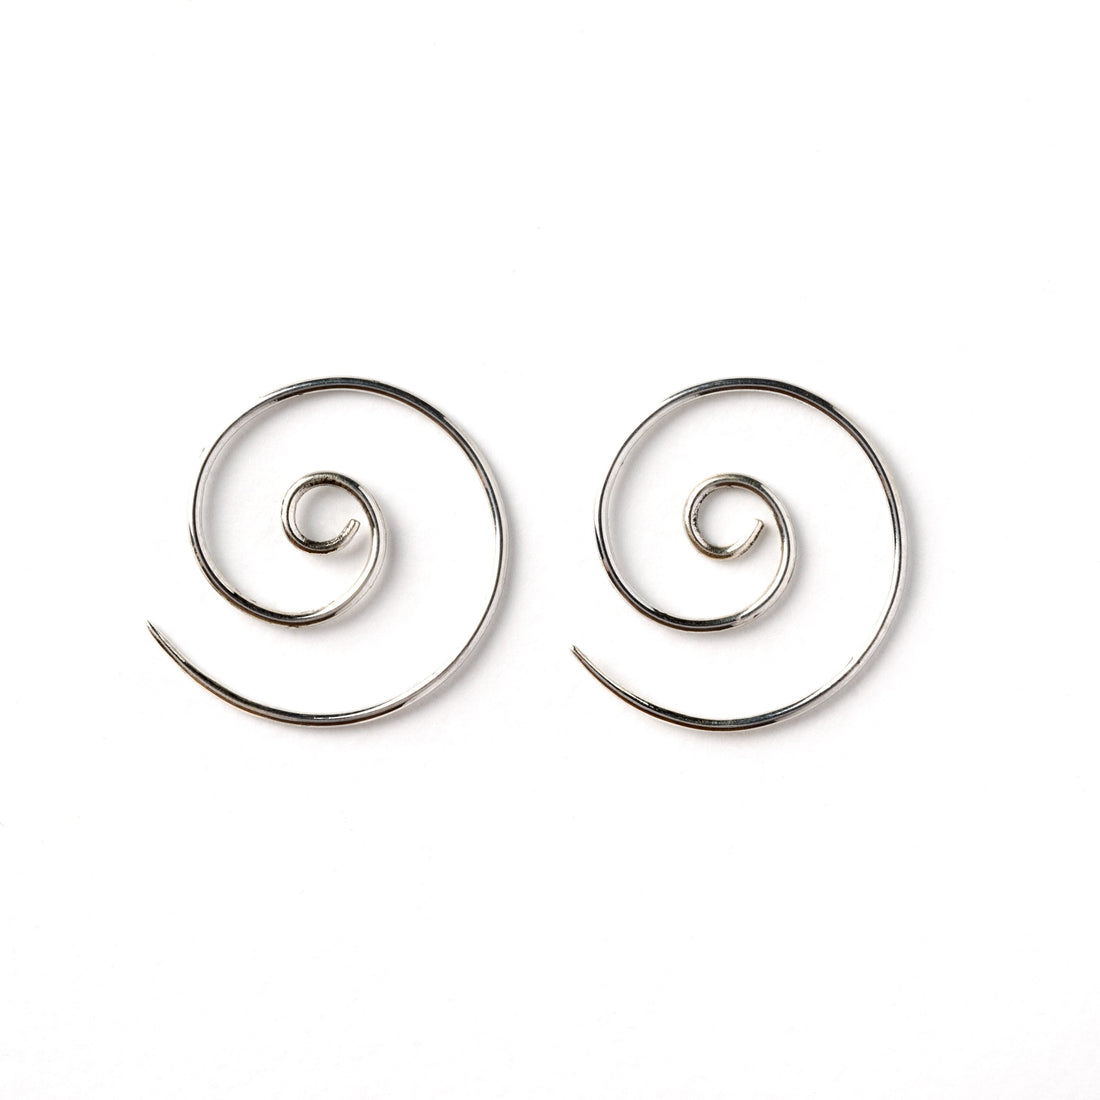 pair of silver spiral wire earrings side view